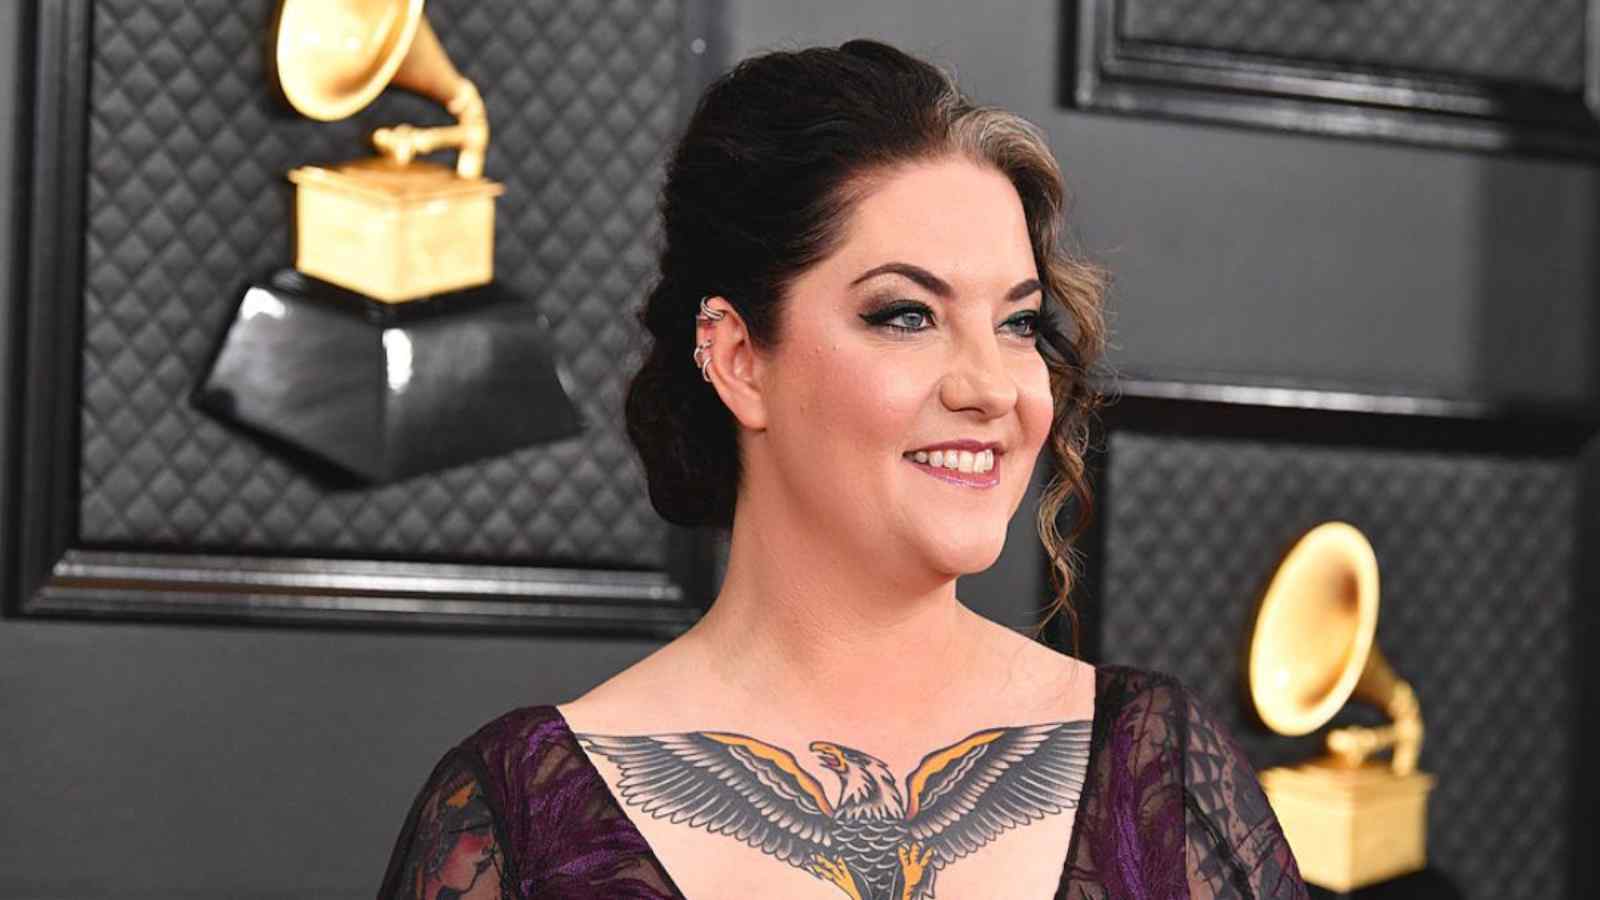 Ashley McBryde Biography: Early Life, Family, Education, Net Worth